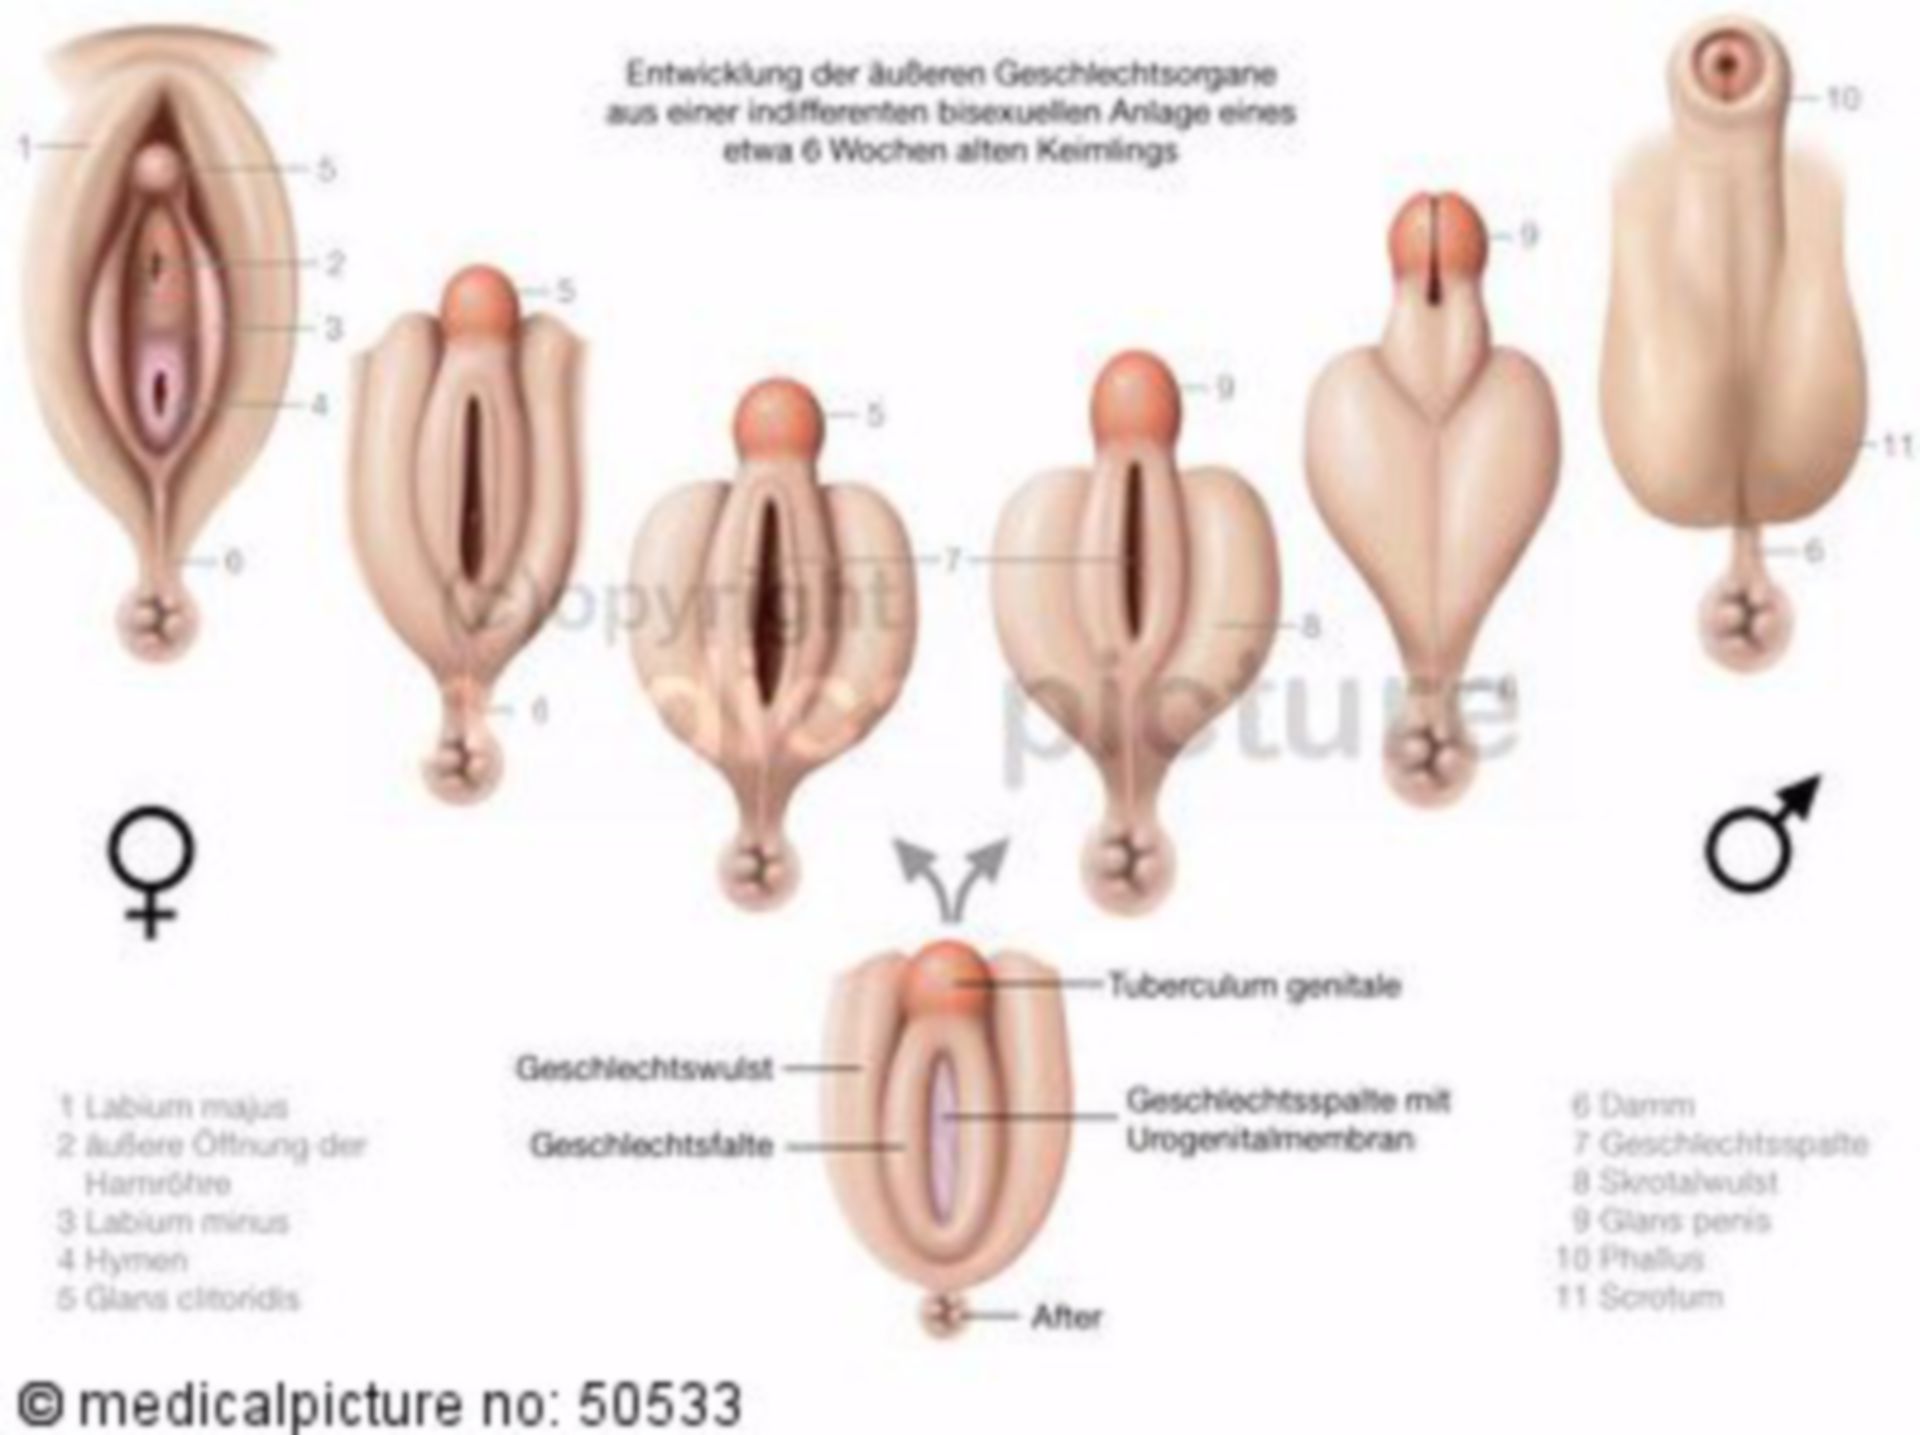 Development of the external sexual organs into male and female forms (labeled)